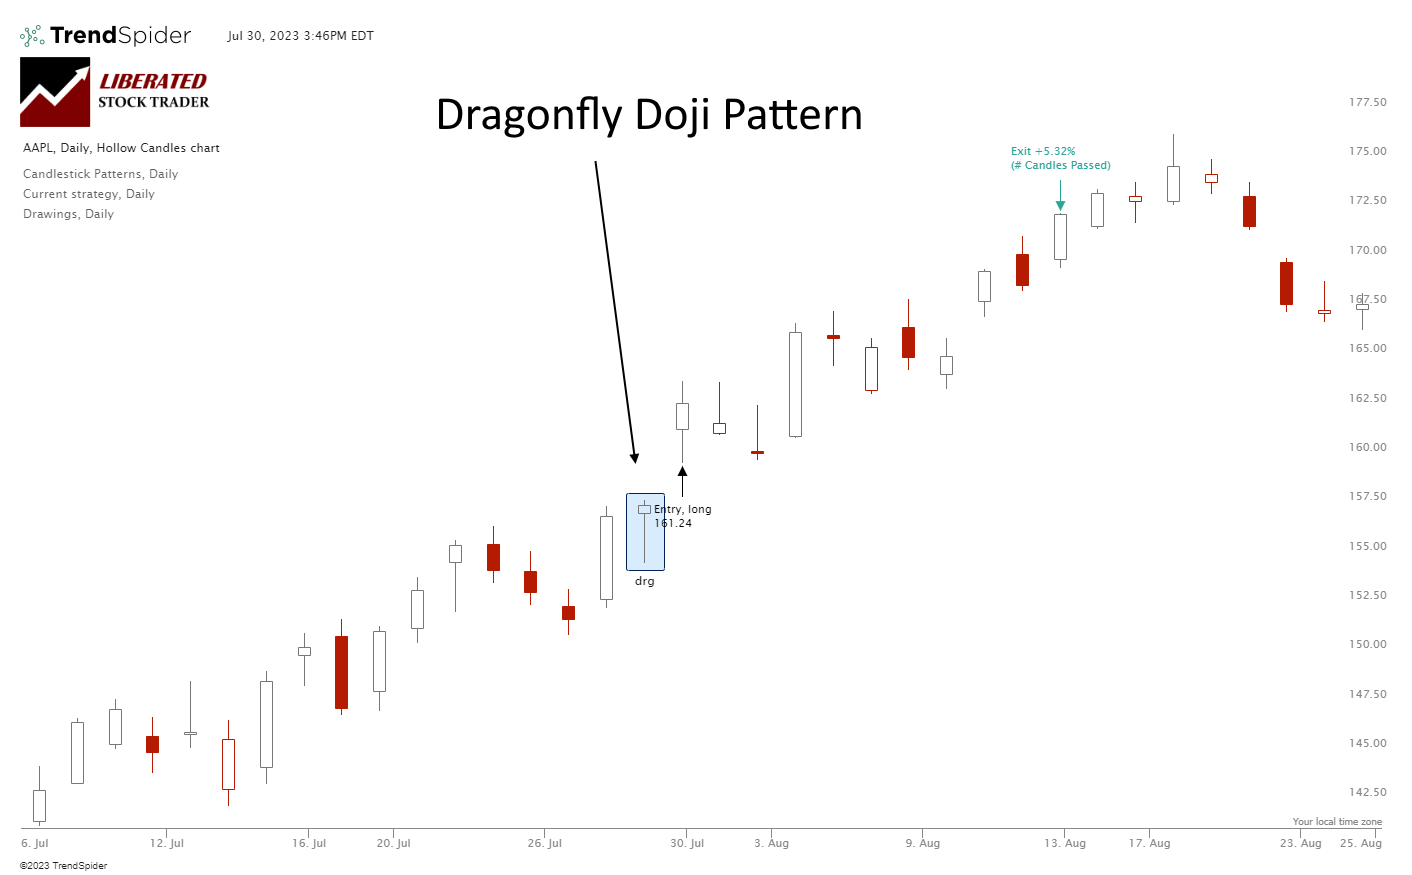 Dragonfly Doji Chart: The Dragonfly Doji displays a session wherein the opening and closing prices are at the high of the day.